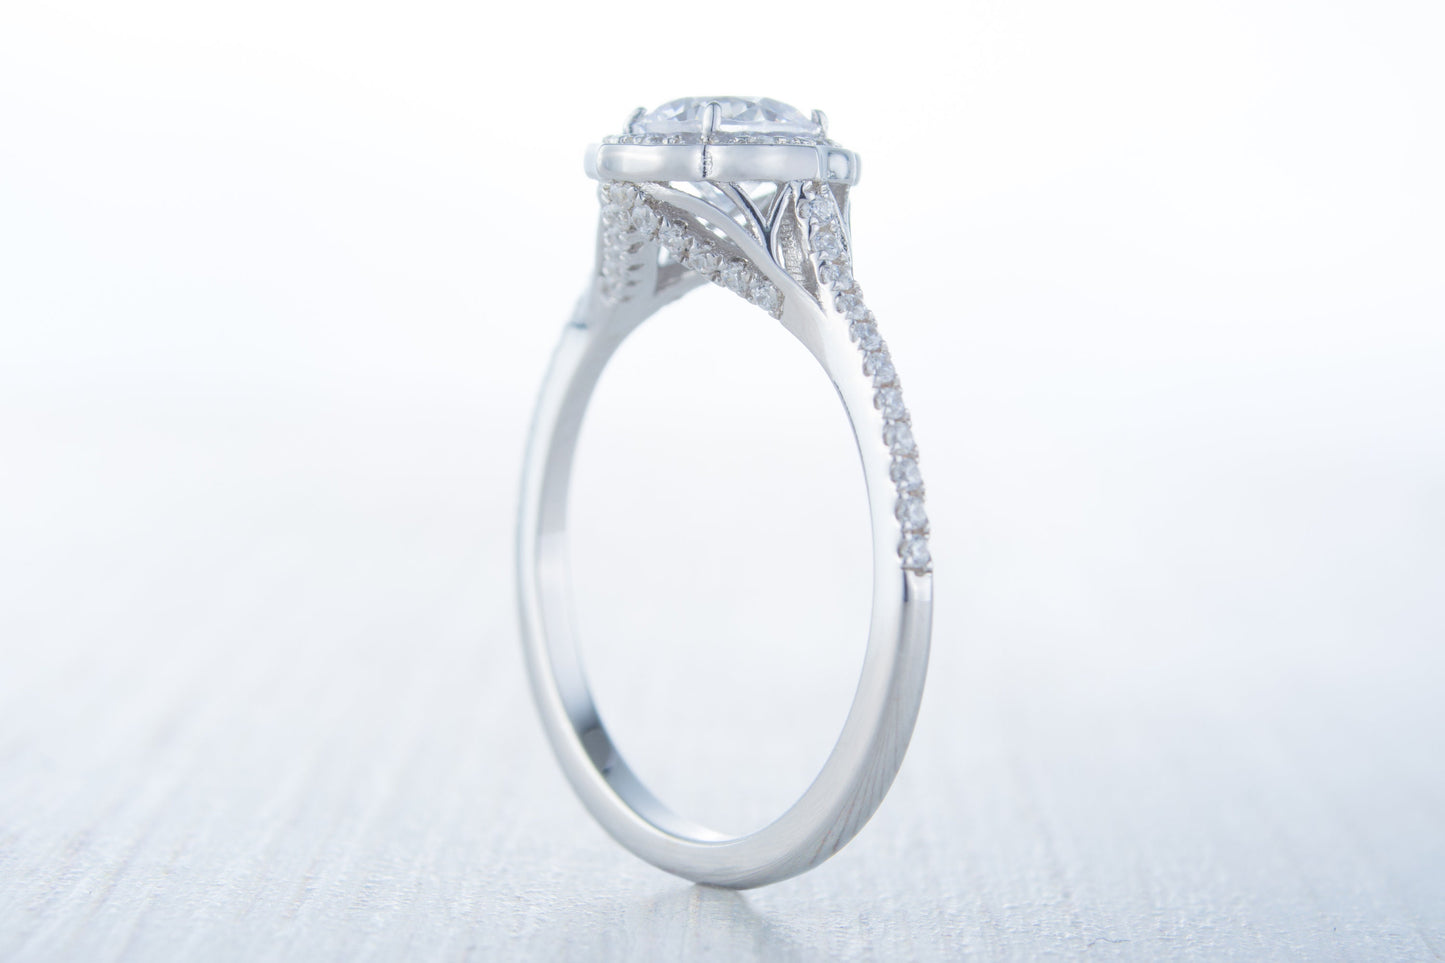 Man made diamond halo solitaire engagement ring available in Sterling Silver or White Gold Filled